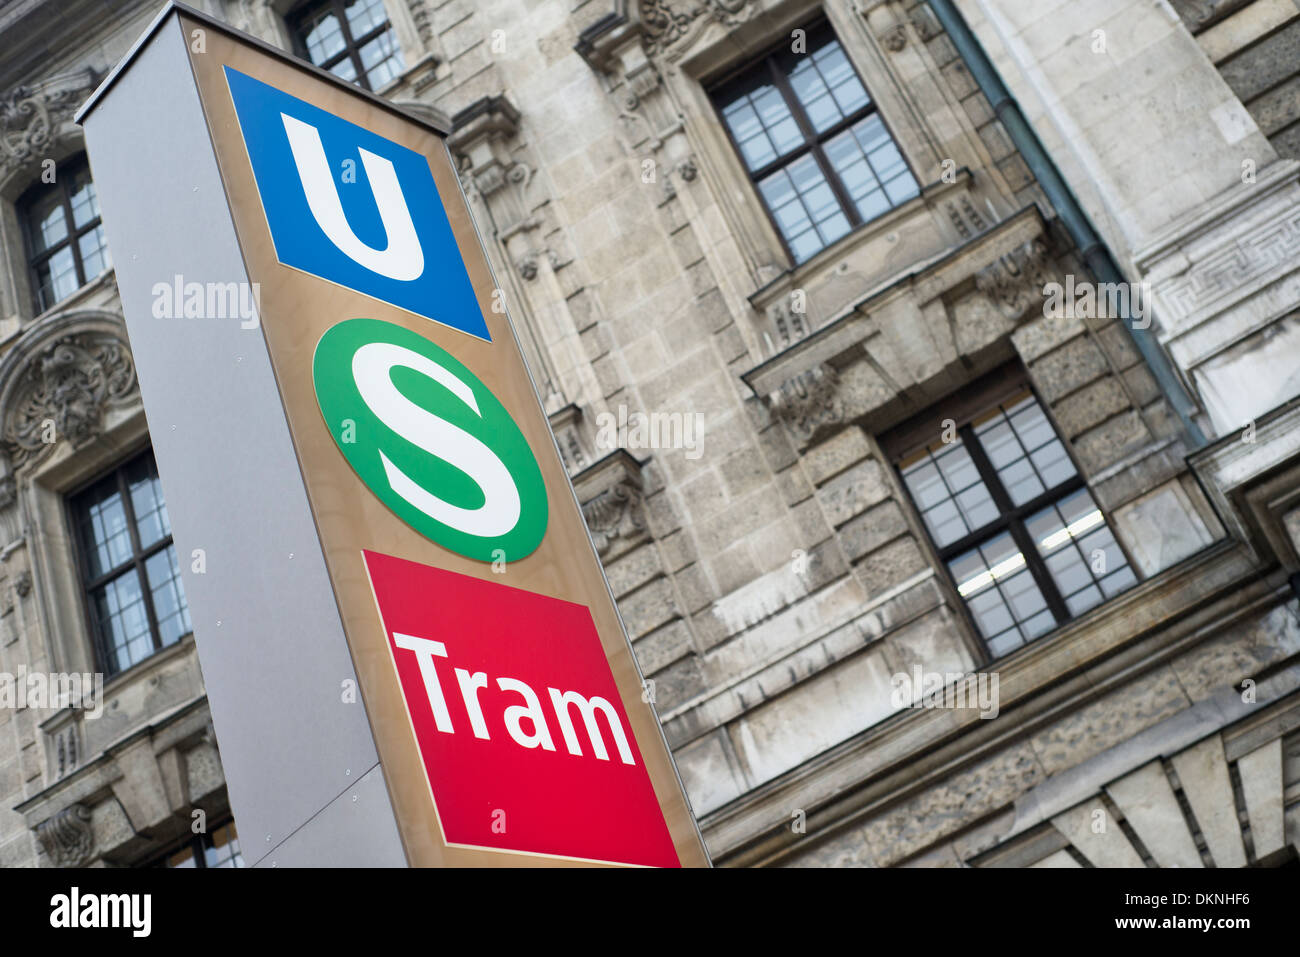 Signs for the U-Bahn subway, tram and S-Bahn railway network in the center of Munich, Germany Stock Photo